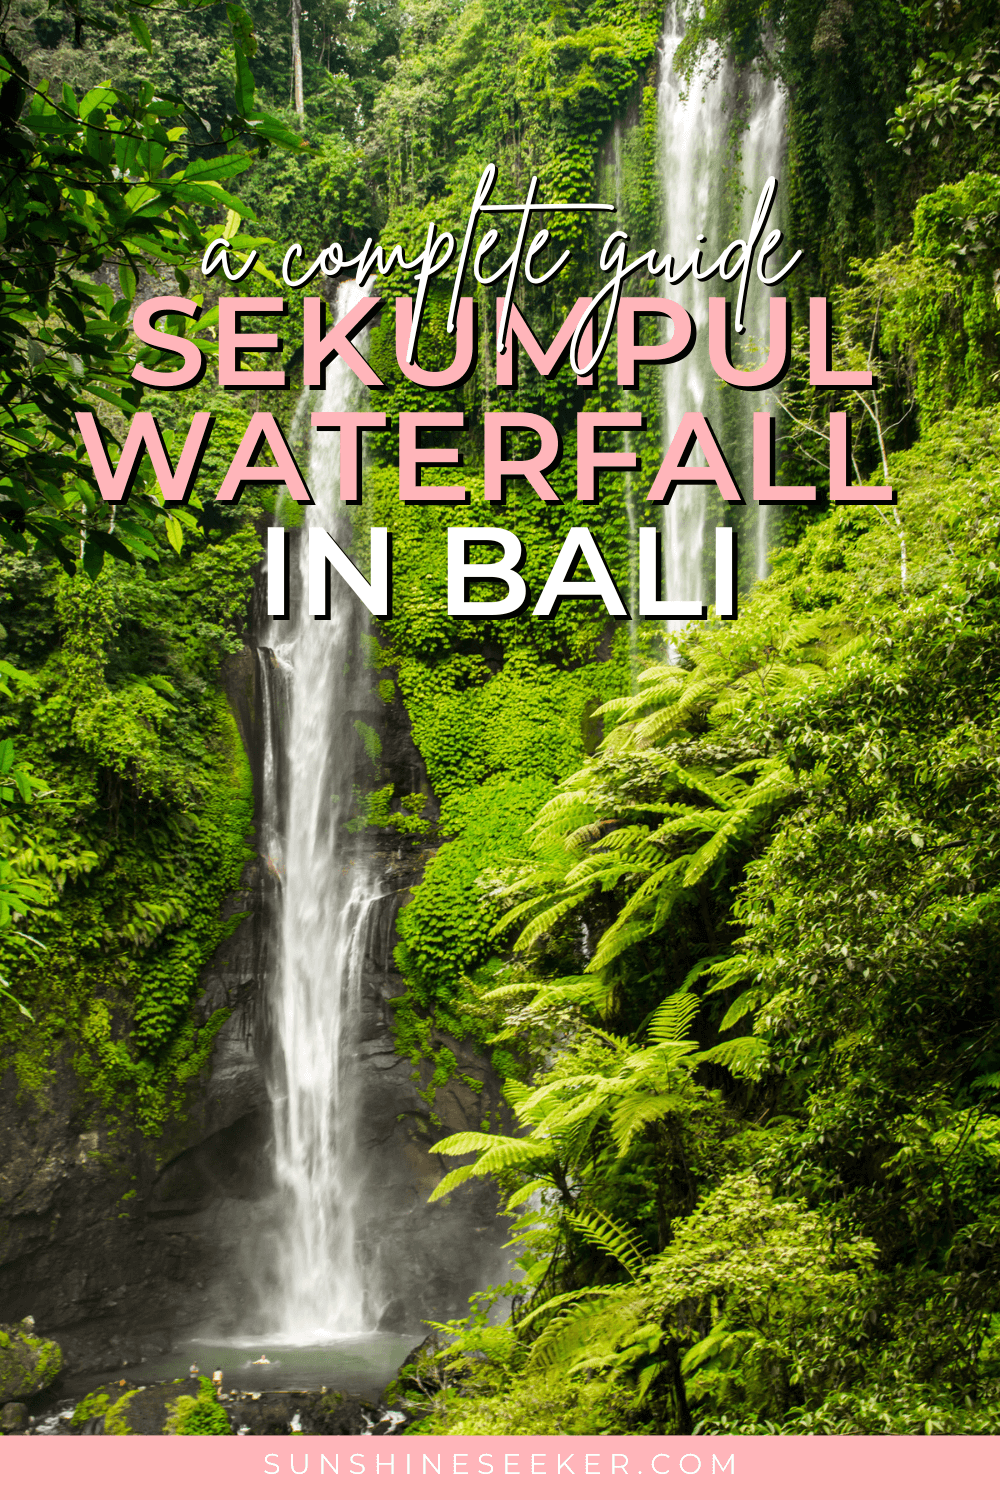 A first timer's guide to visiting Sekumpul Waterfall in Bali. Everything you need to know before you go, including the best tours, the best time to visit Sekumpul Waterfall and how to get there.